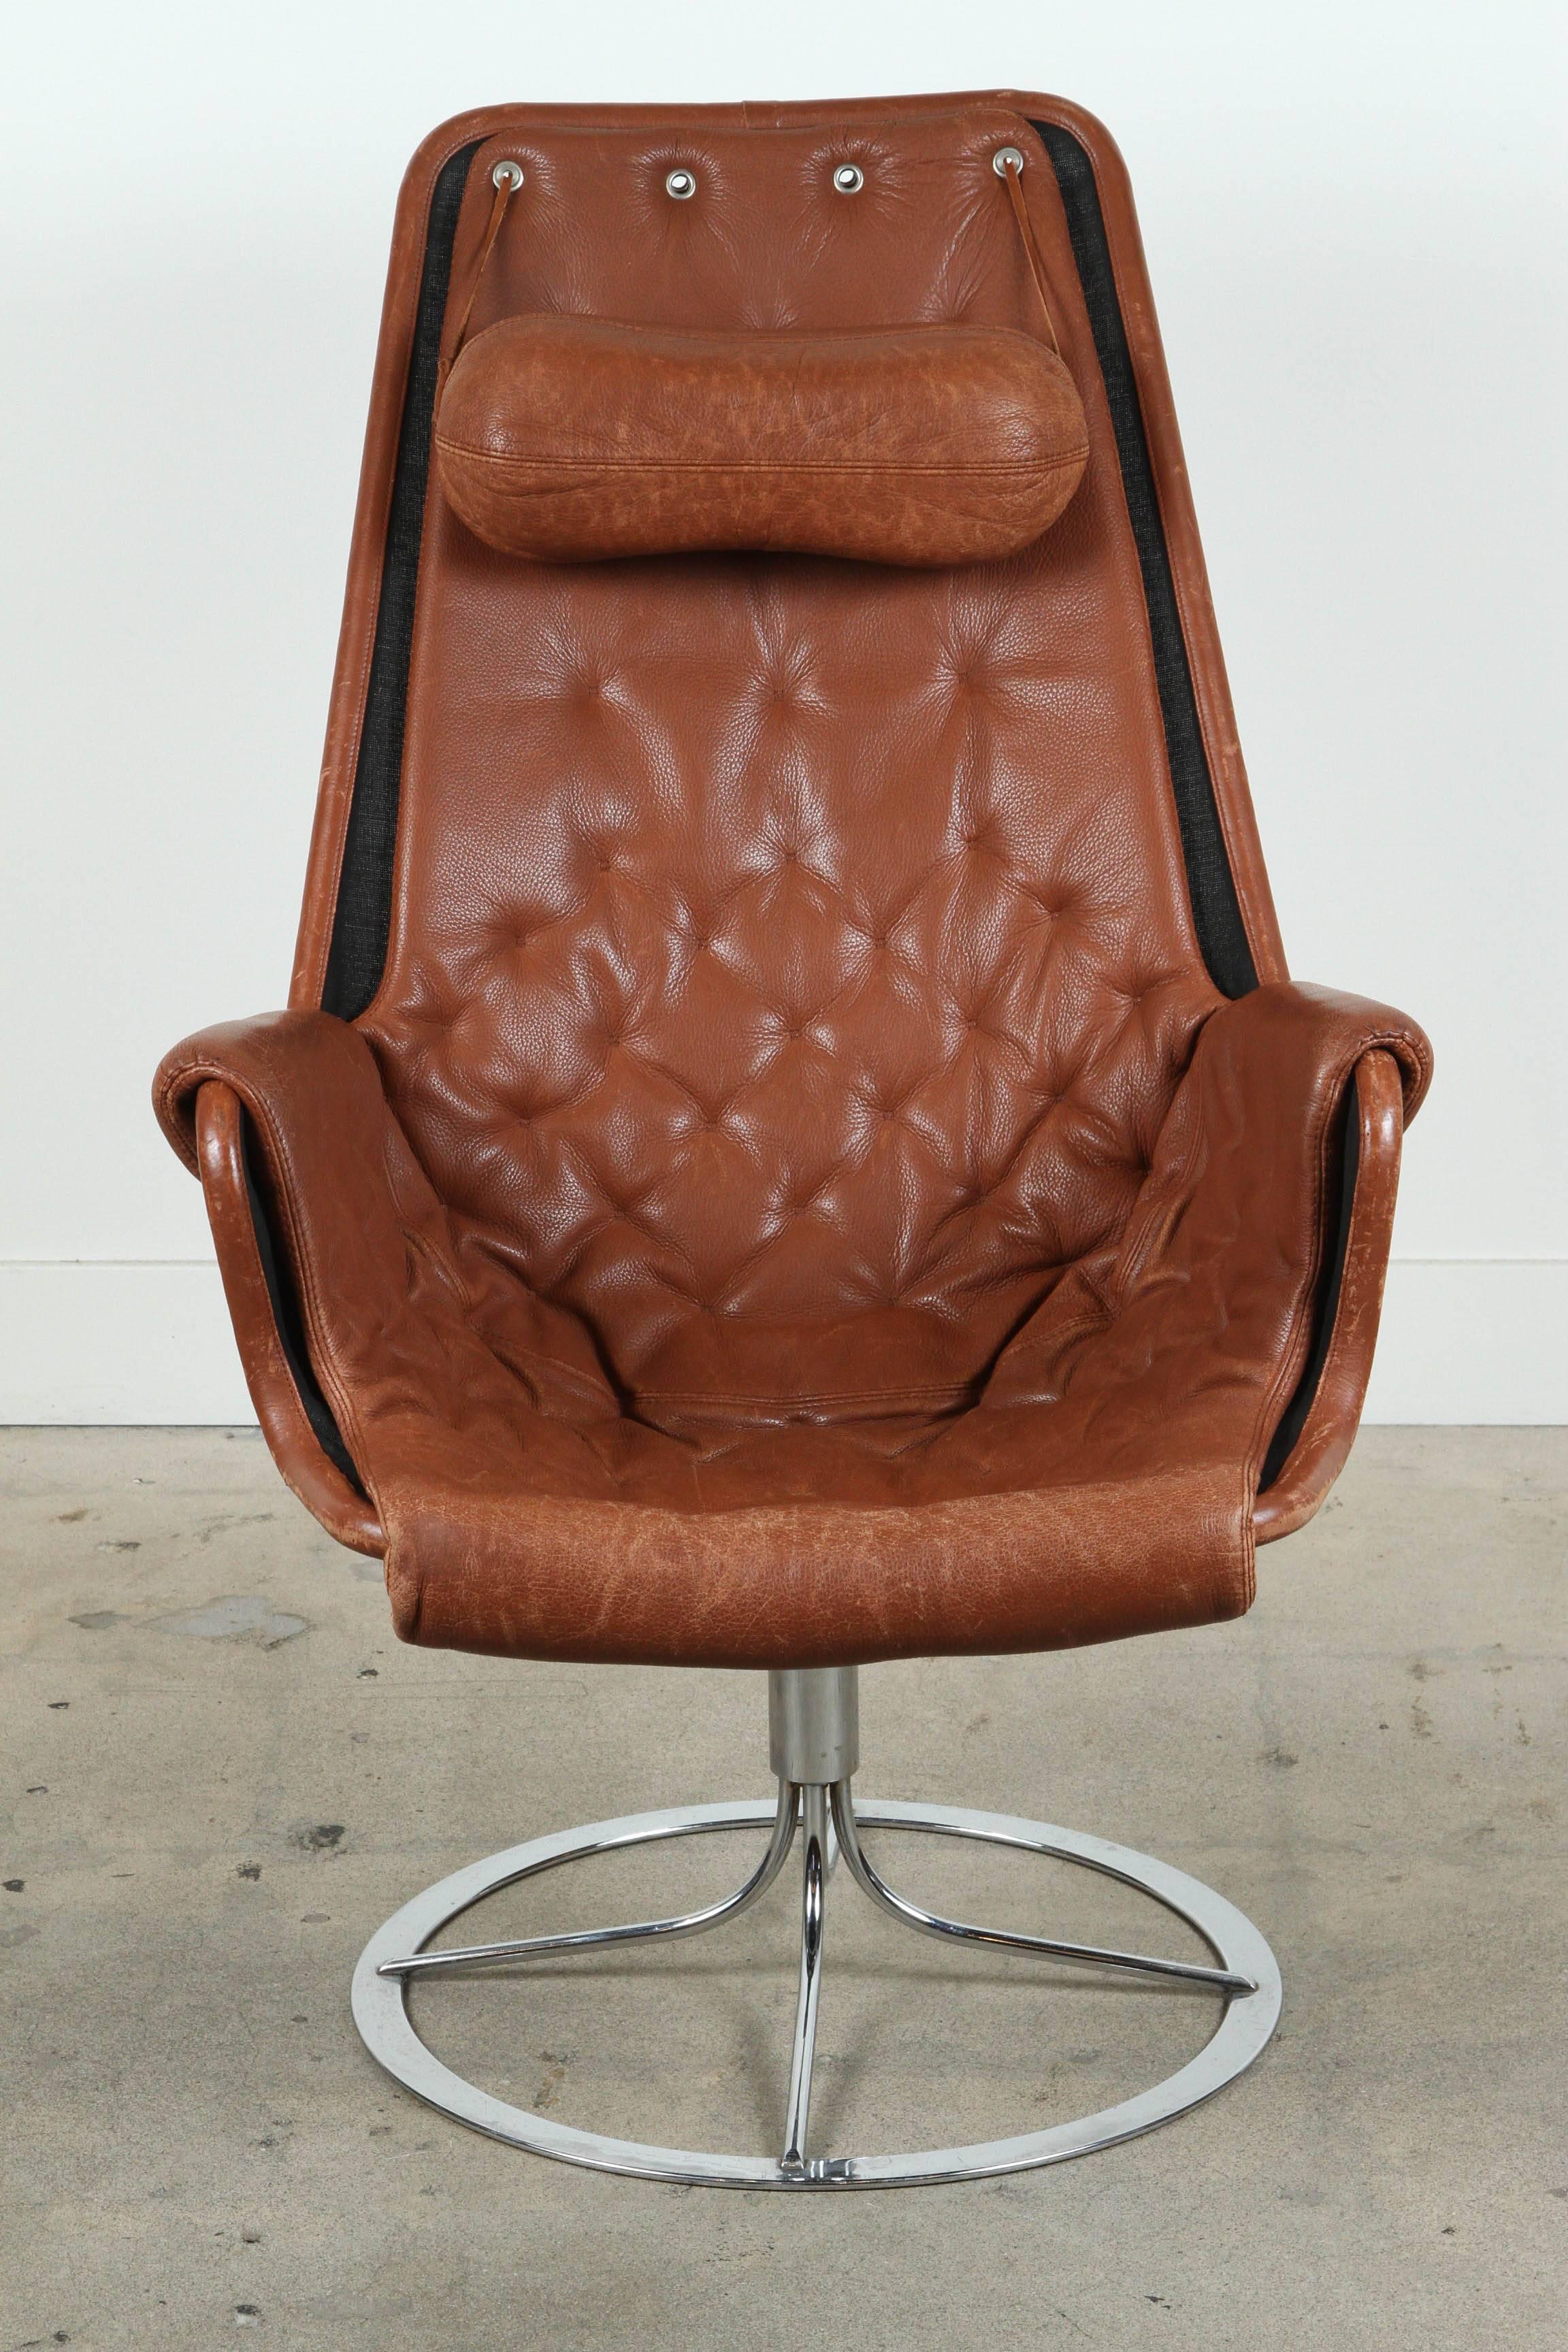 Leather Jetson chair by Bruno Mathsson for DUX.